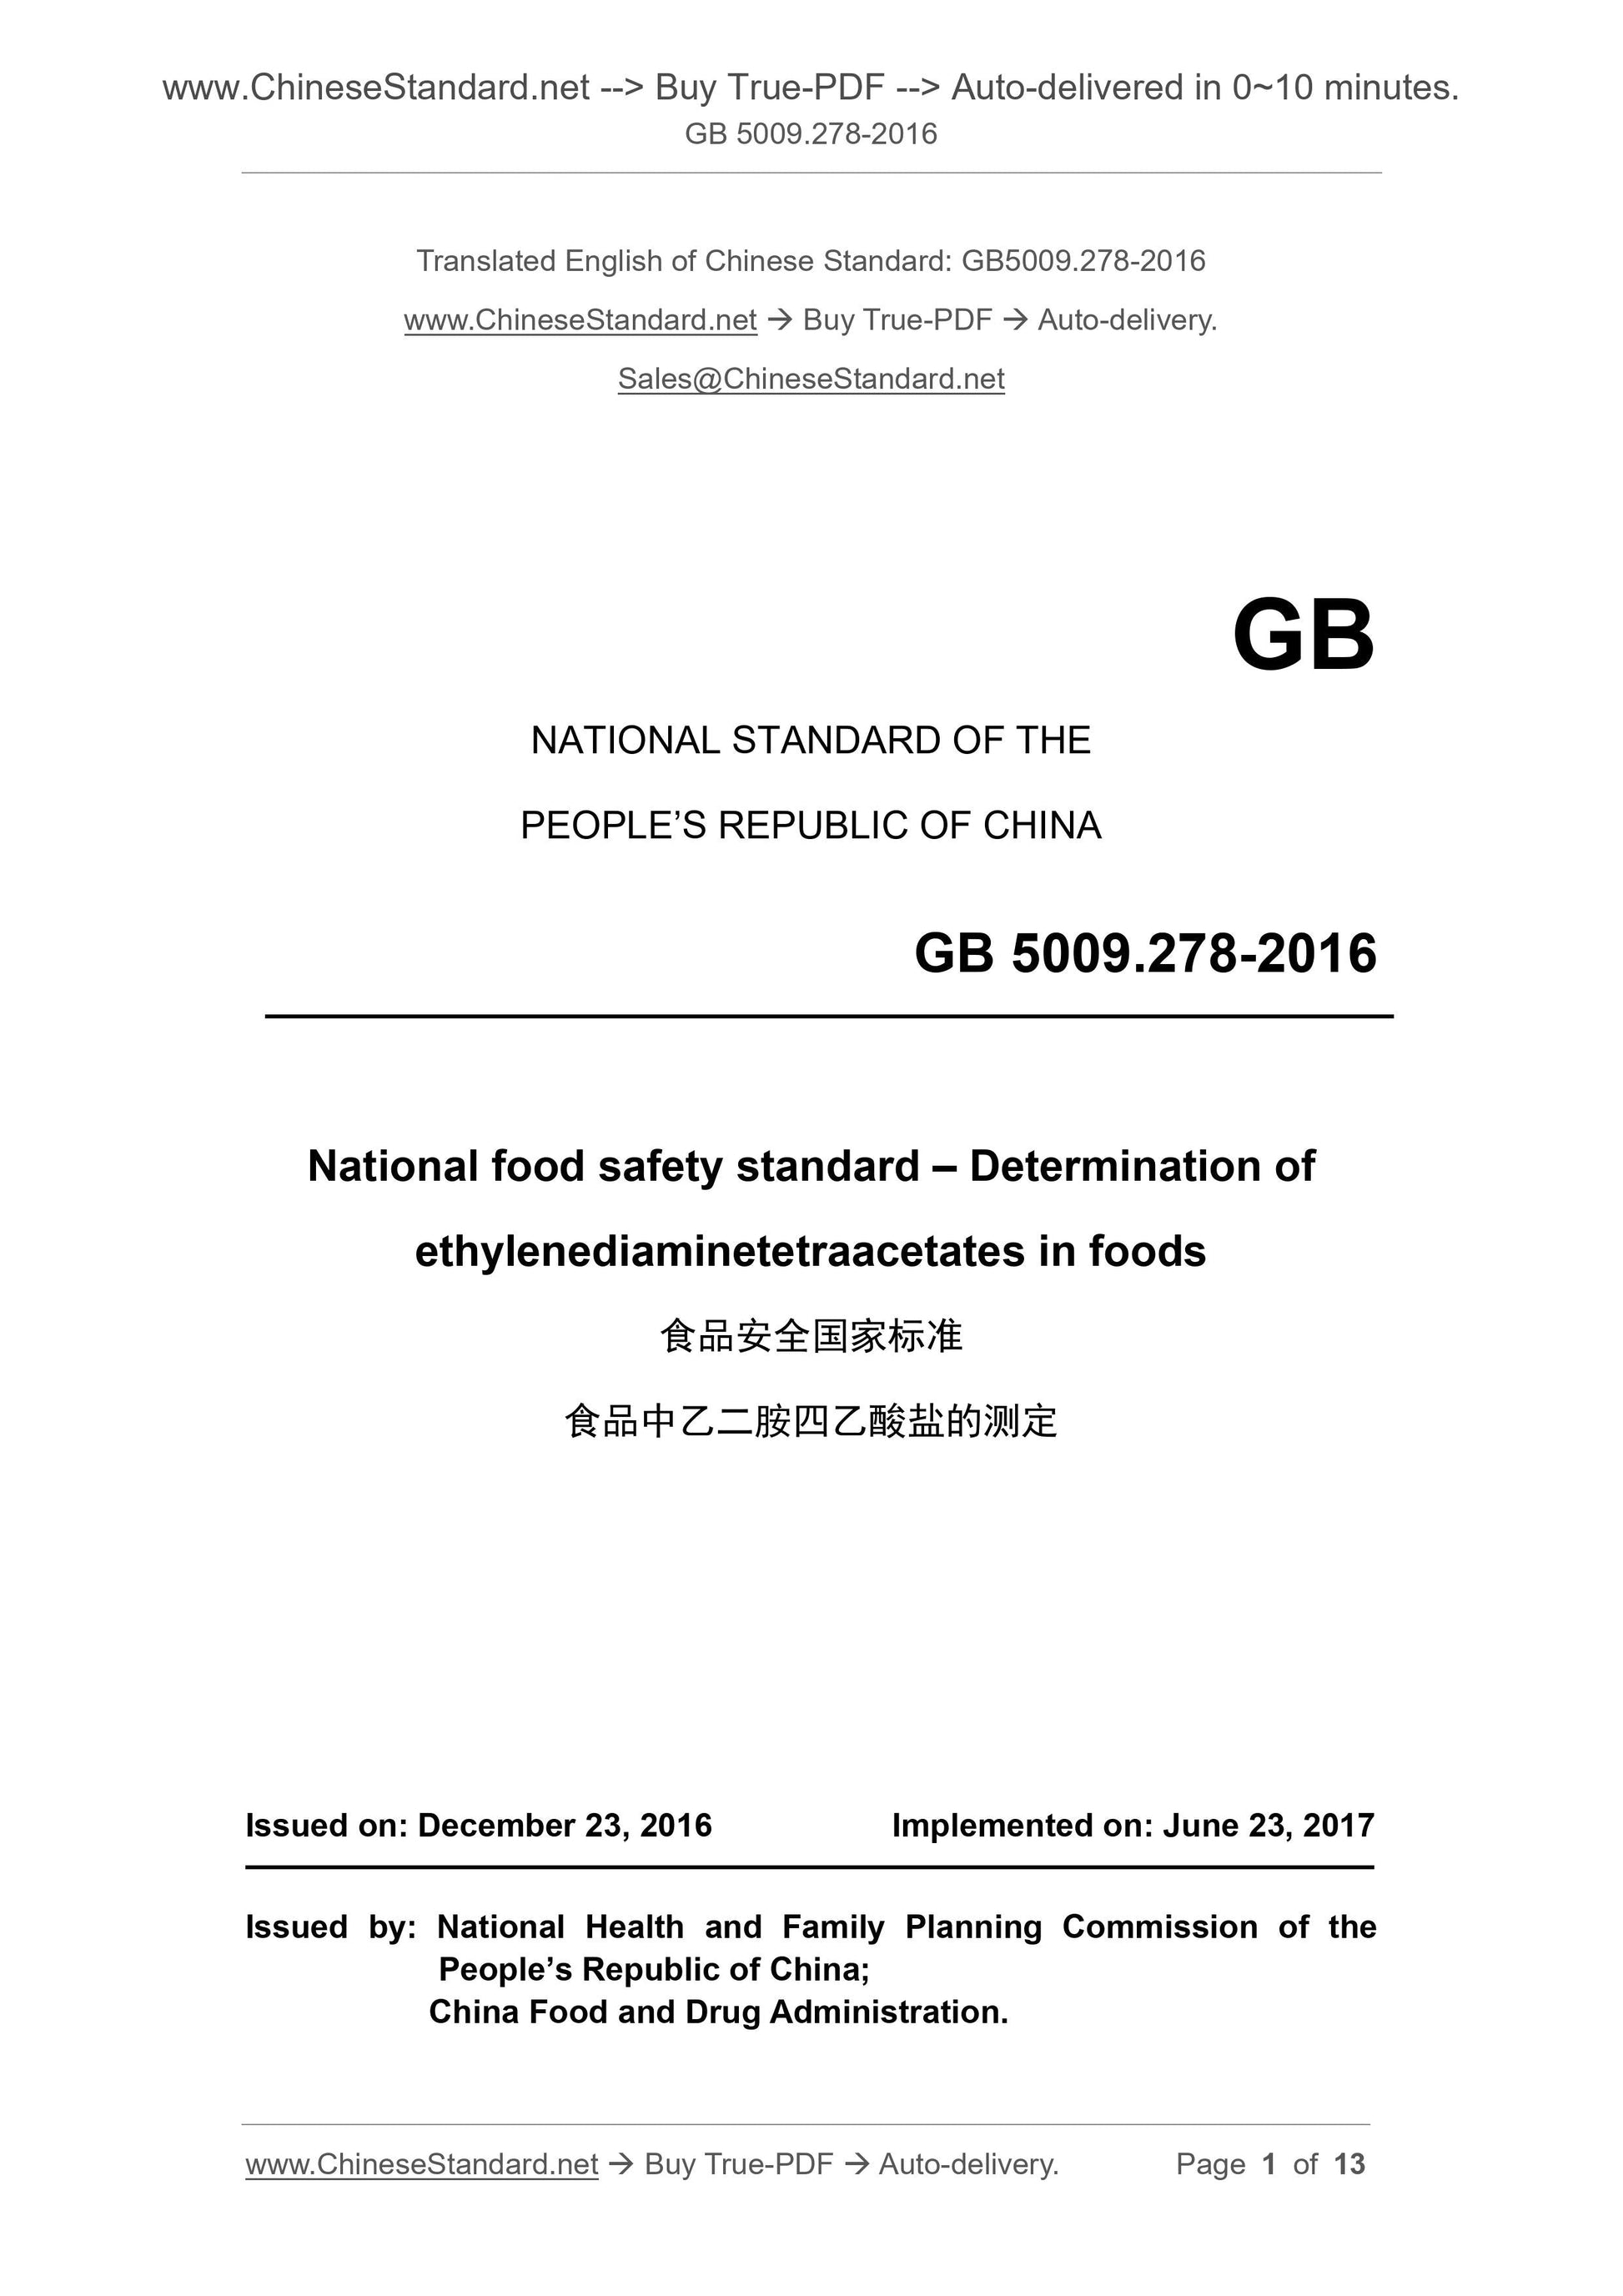 GB 5009.278-2016 Page 1